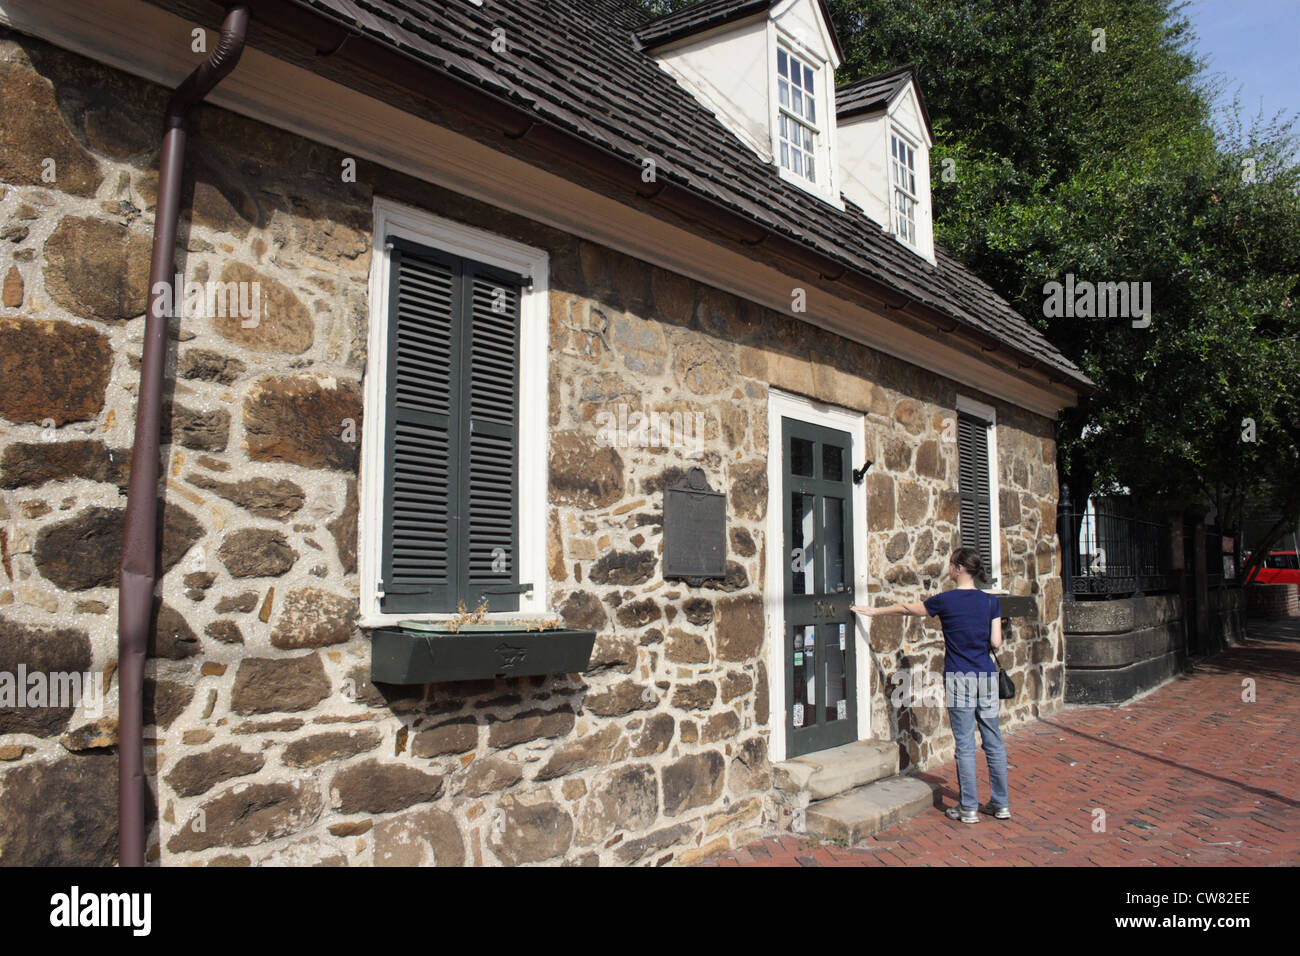 Historic Edgar Allen Poe museum in Richmond, Virginia, USA. The building is the oldest house in Richmond. Stock Photo